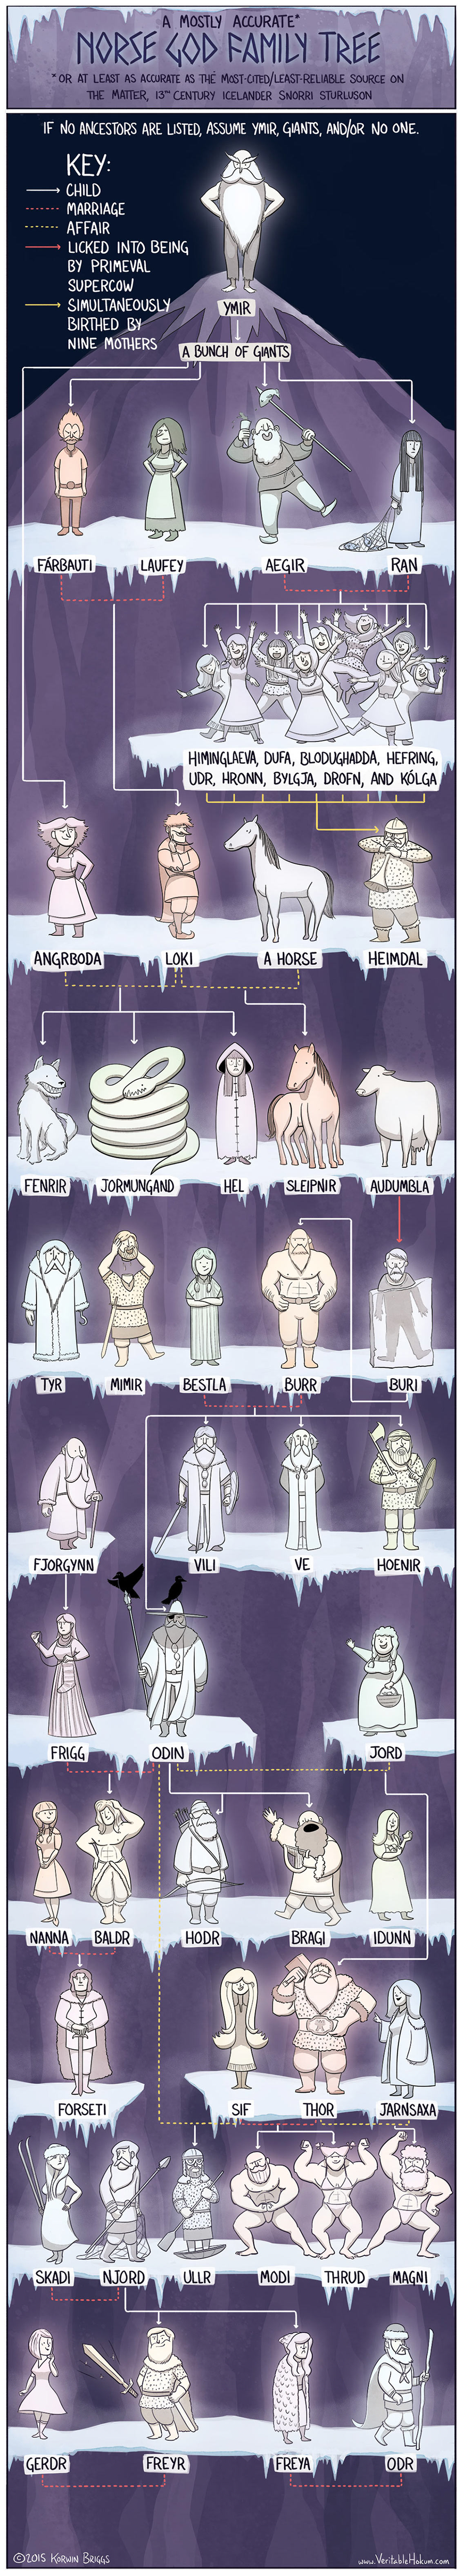 Norse Gods and Goddesses Family Tree infographic